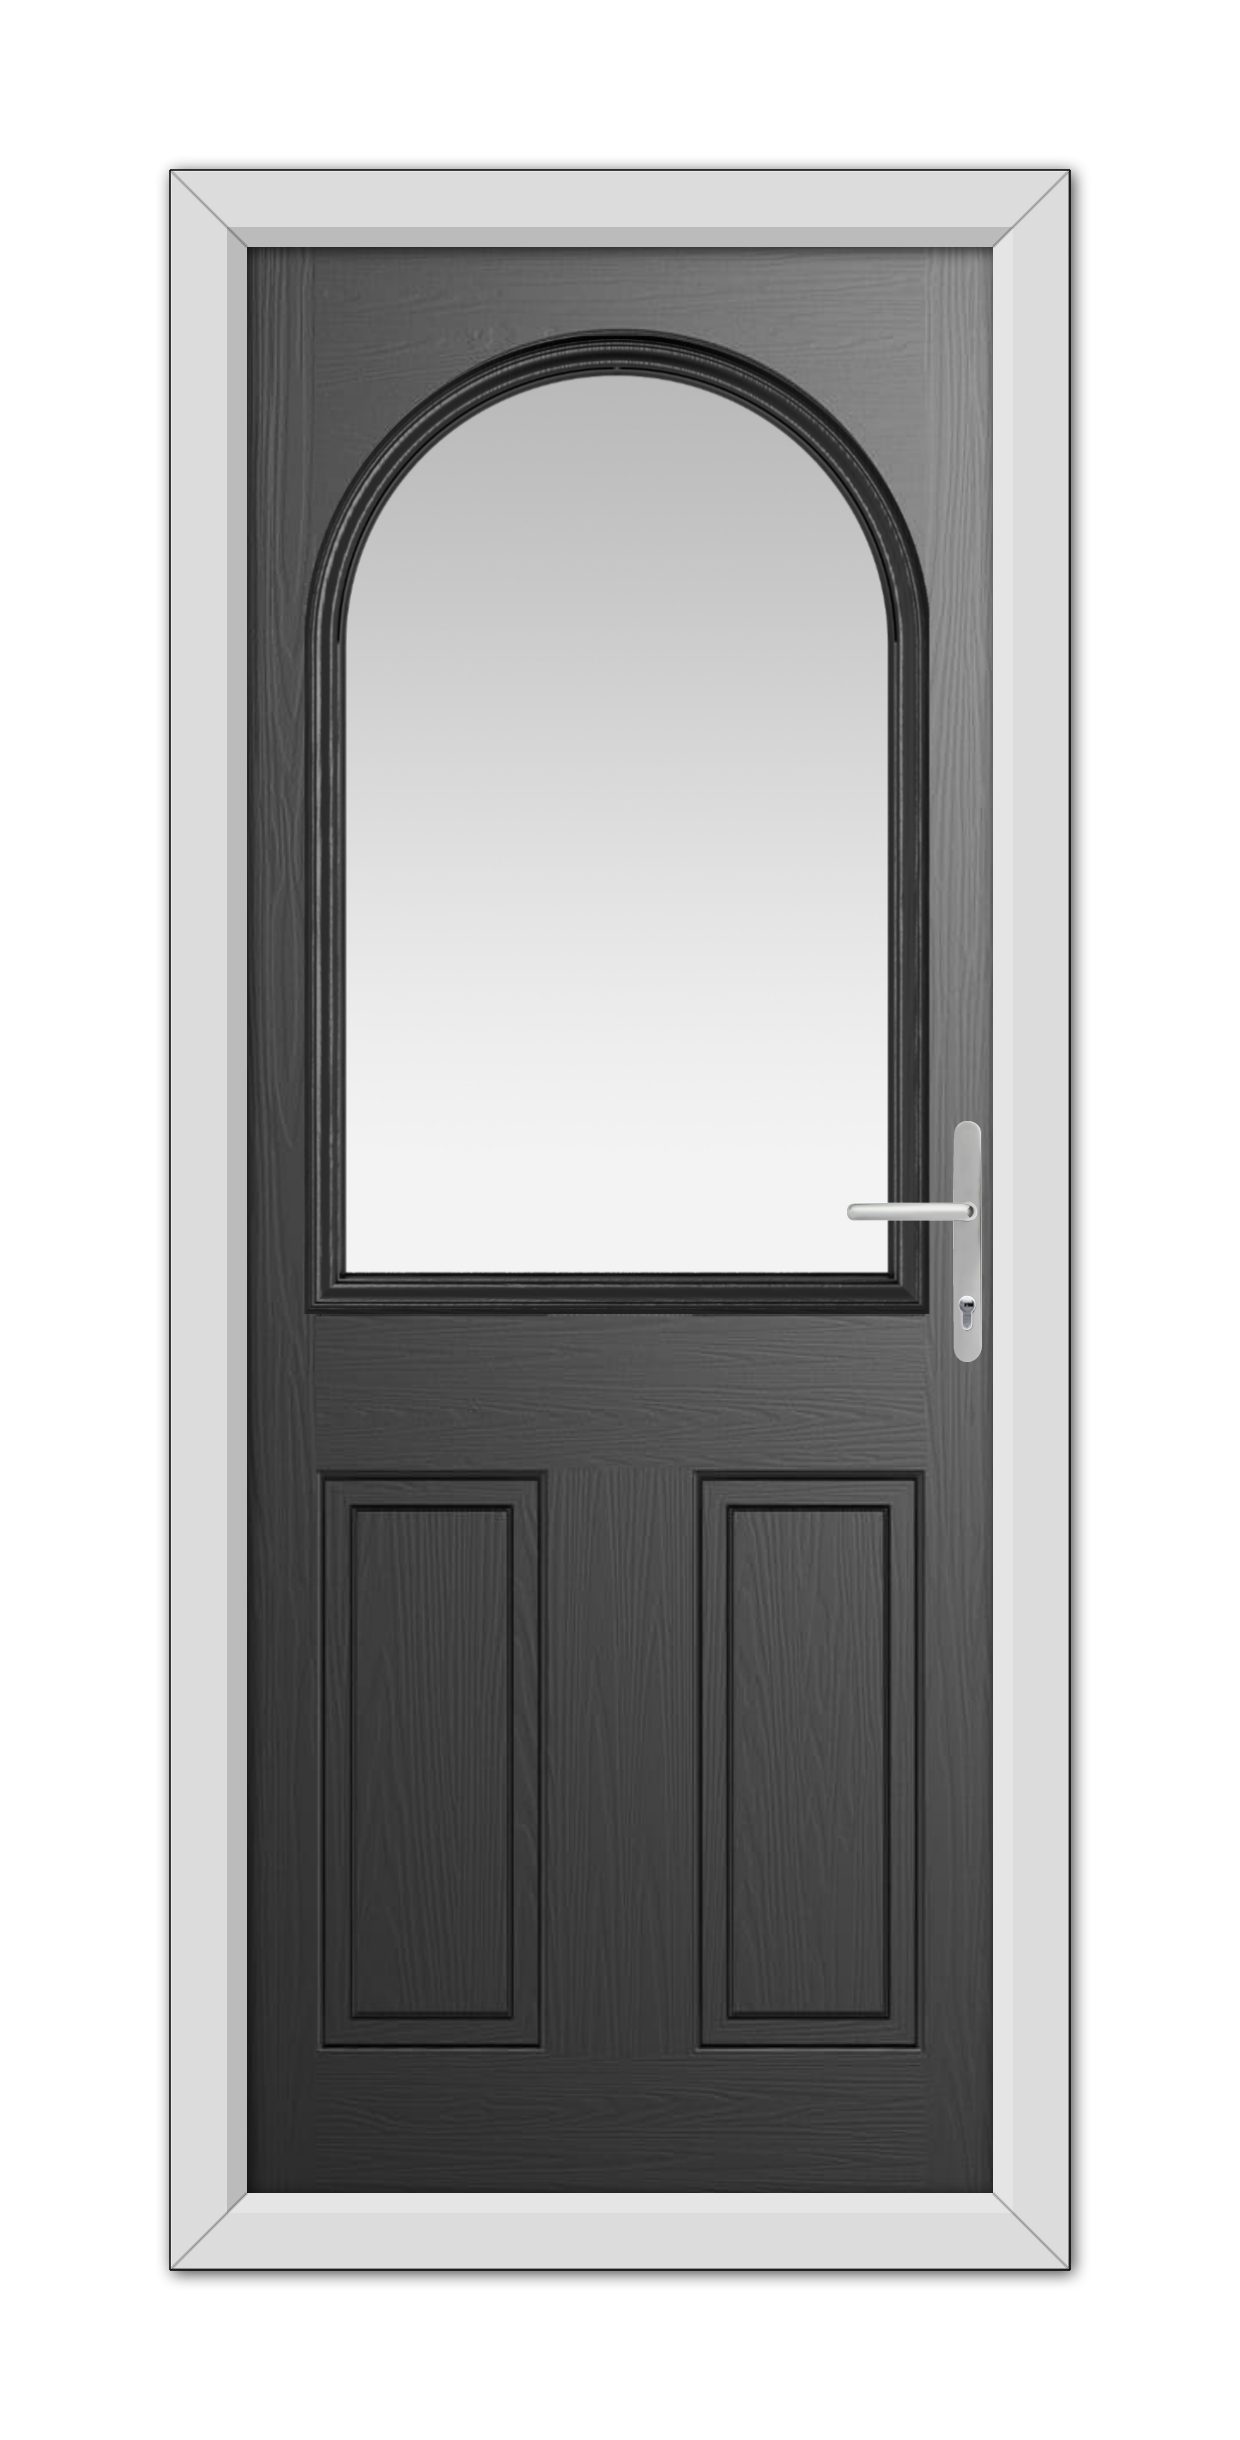 A modern Black Grafton Composite Door 48mm Timber Core with an arched window at the top, set in a white frame, featuring a silver handle on the right.